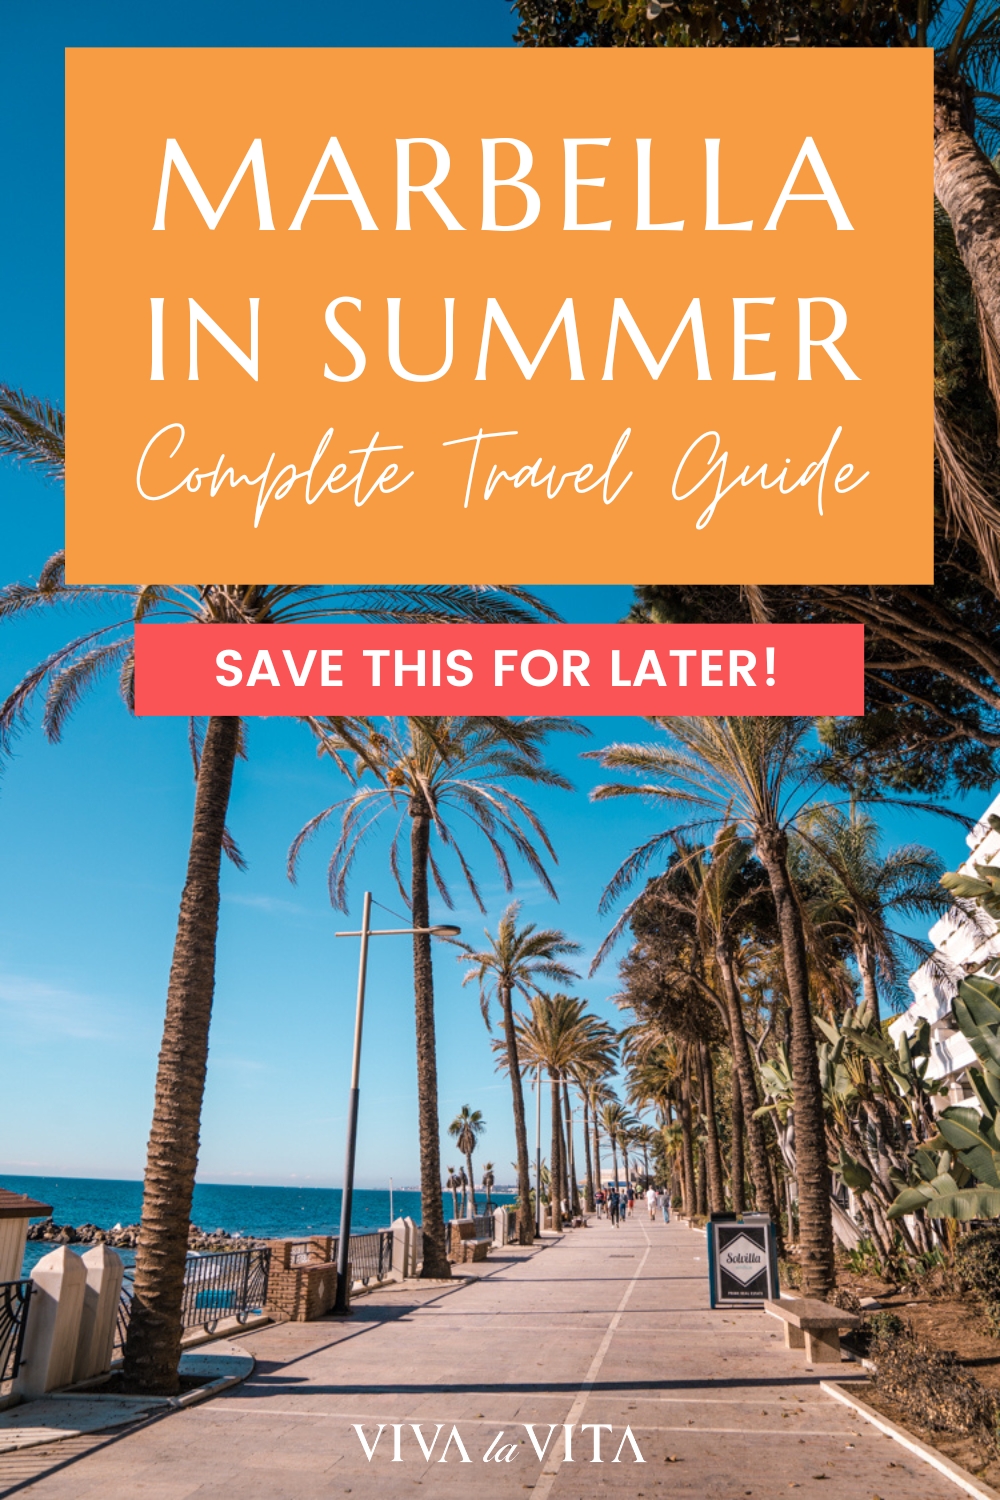 Pinterest image showing the coastal promenade in Marbella, Southern Spain, with a headline that reads - Marbella in Summer - Complete Travel Guide